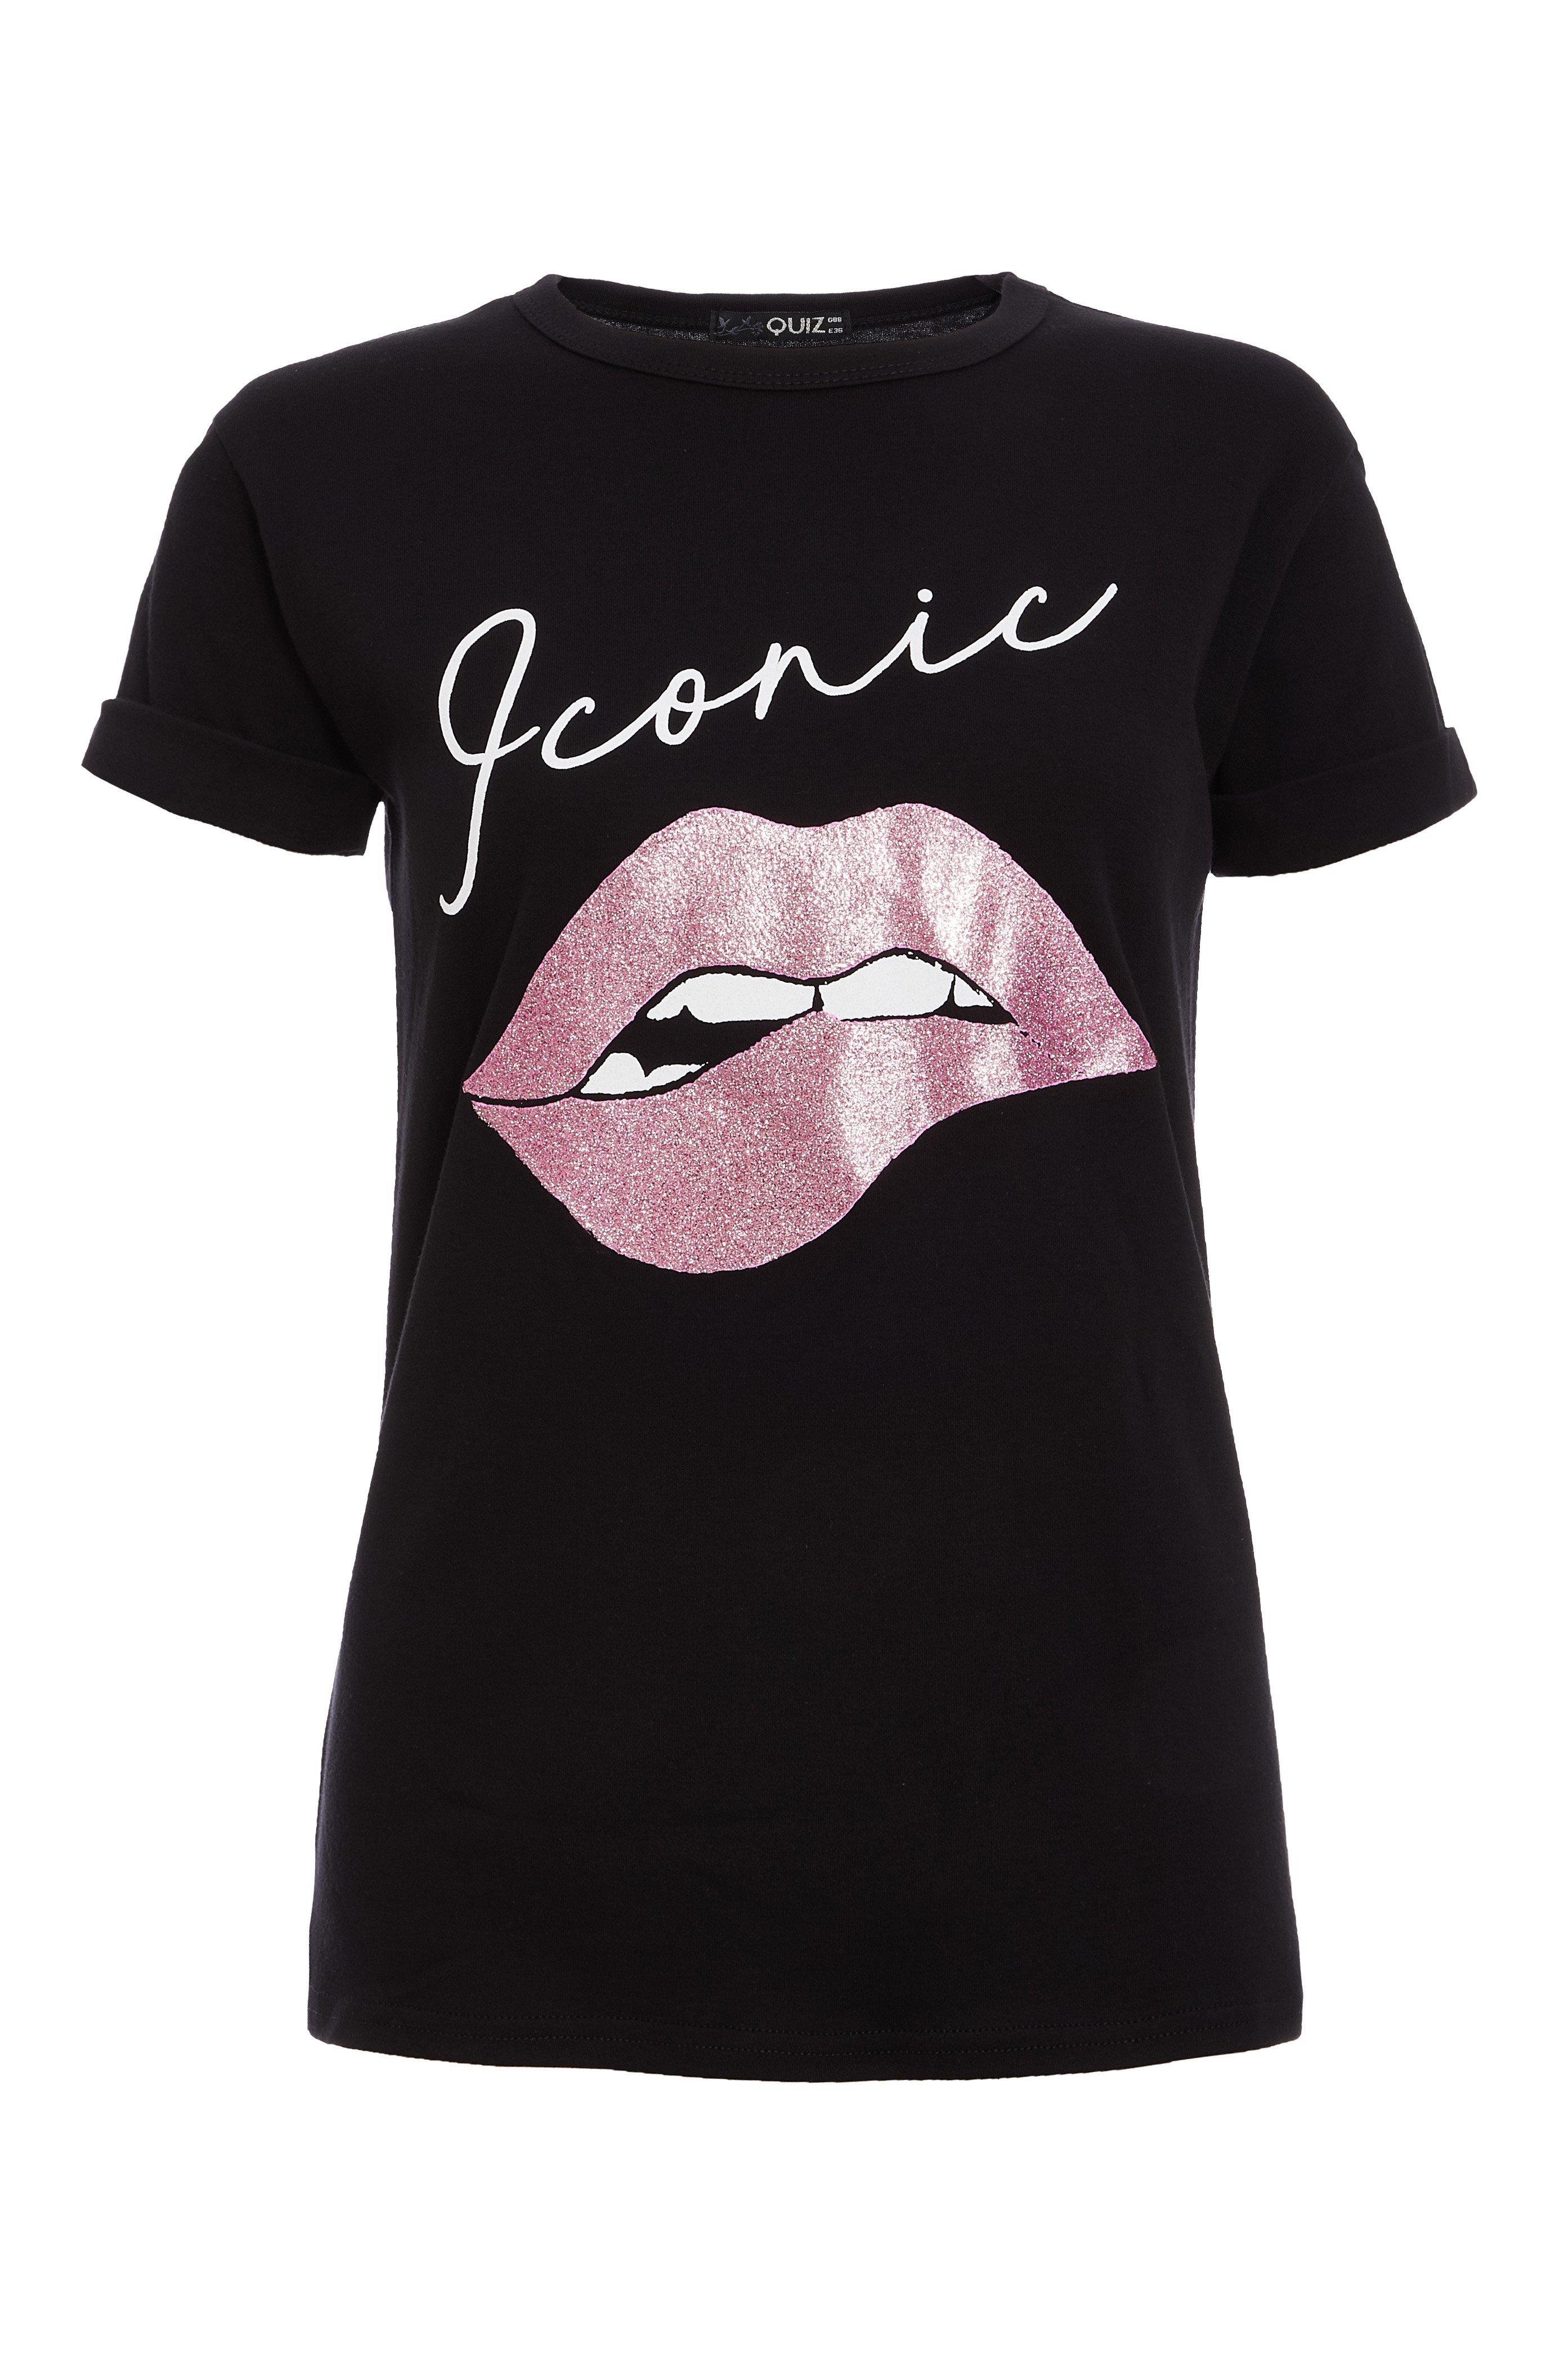 Black and Pink Iconic Lips T-Shirt - Quiz Clothing